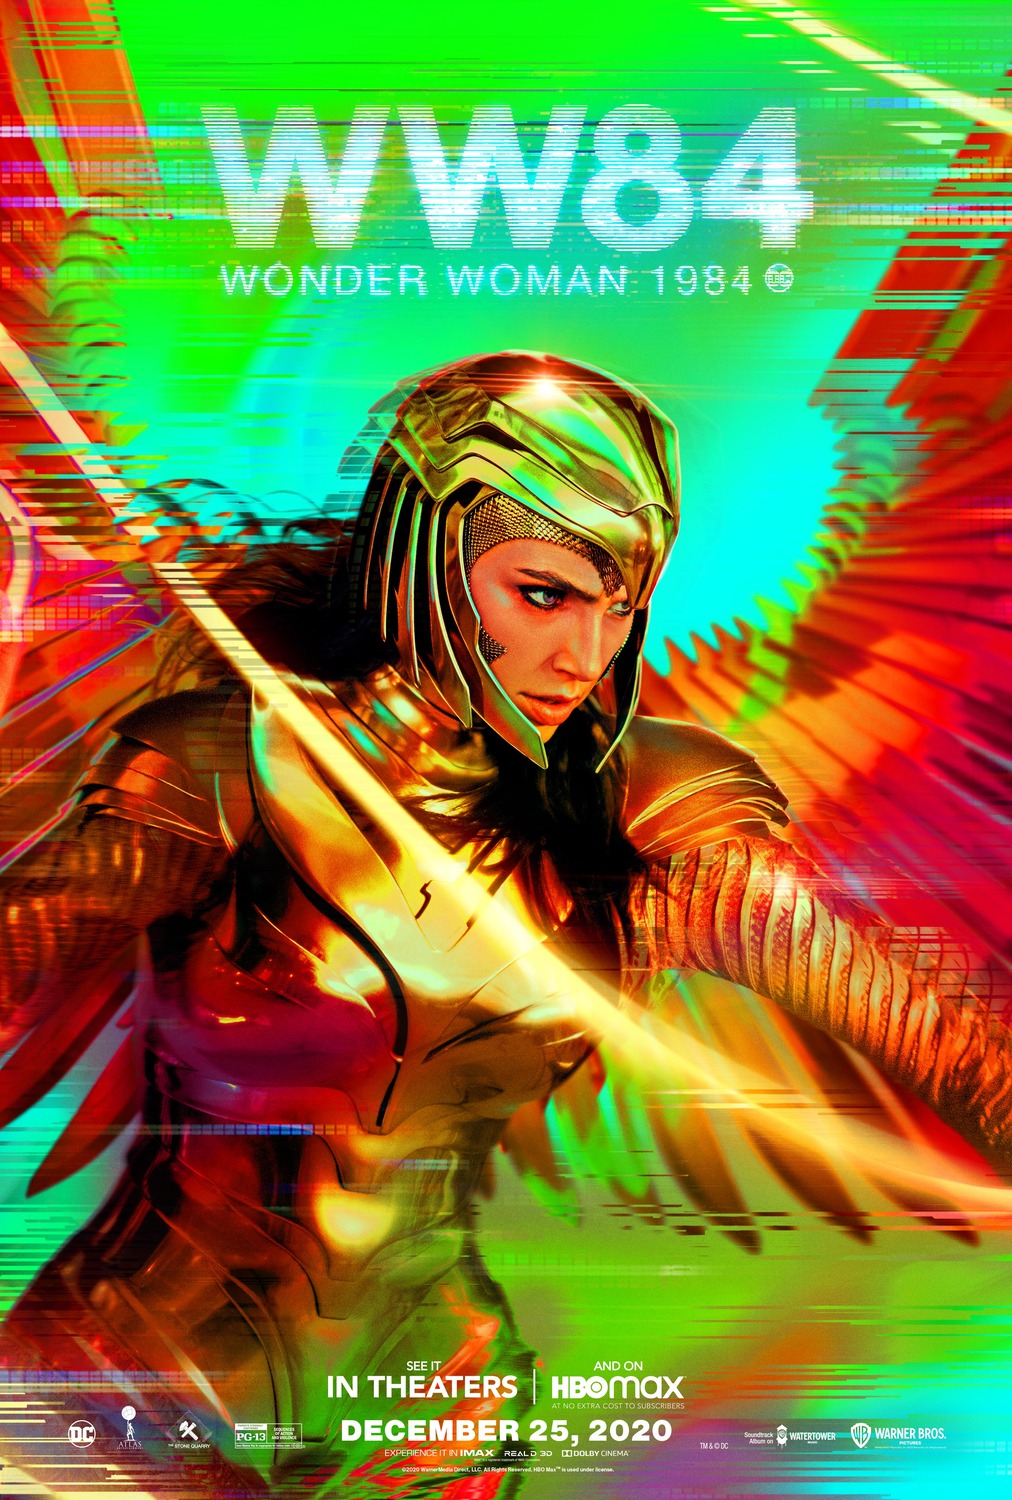 Details about   X-415 New Wonder Woman 1984 Movie 2020 Japanese Fabric Poster 24x36 14x21 